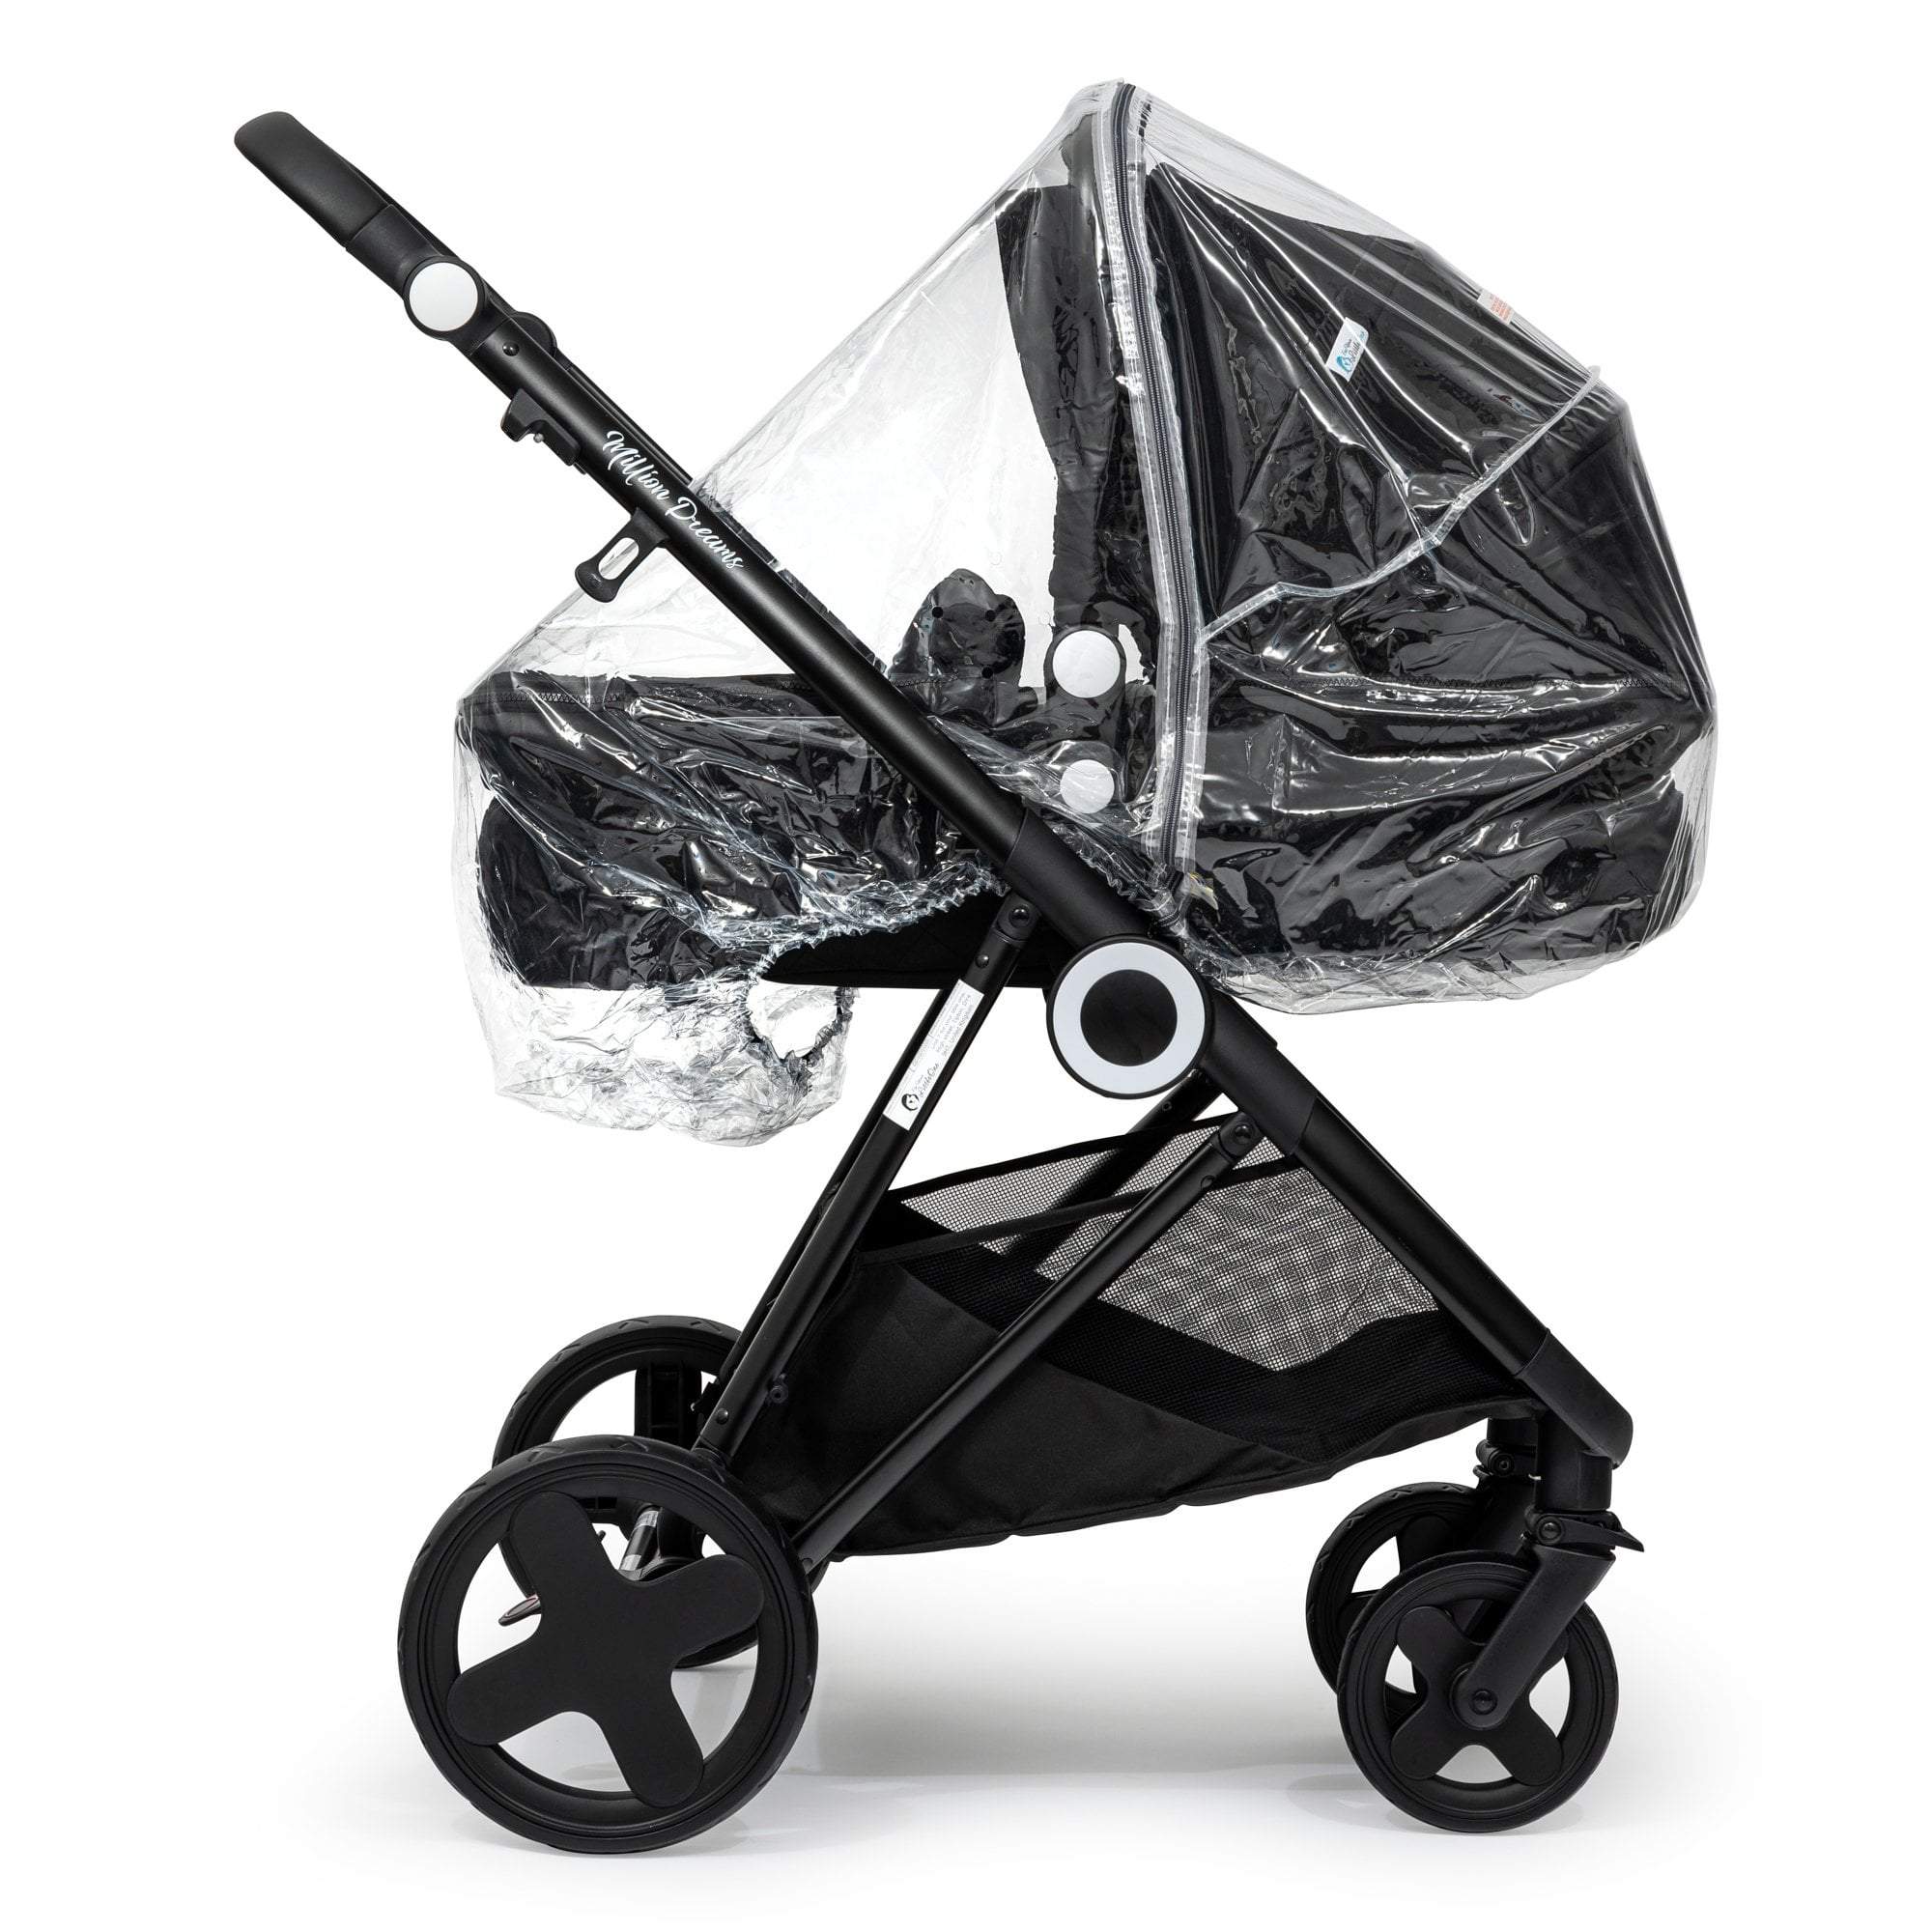 Carrycot Raincover Compatible With Bebecar - Fits All Models - For Your Little One